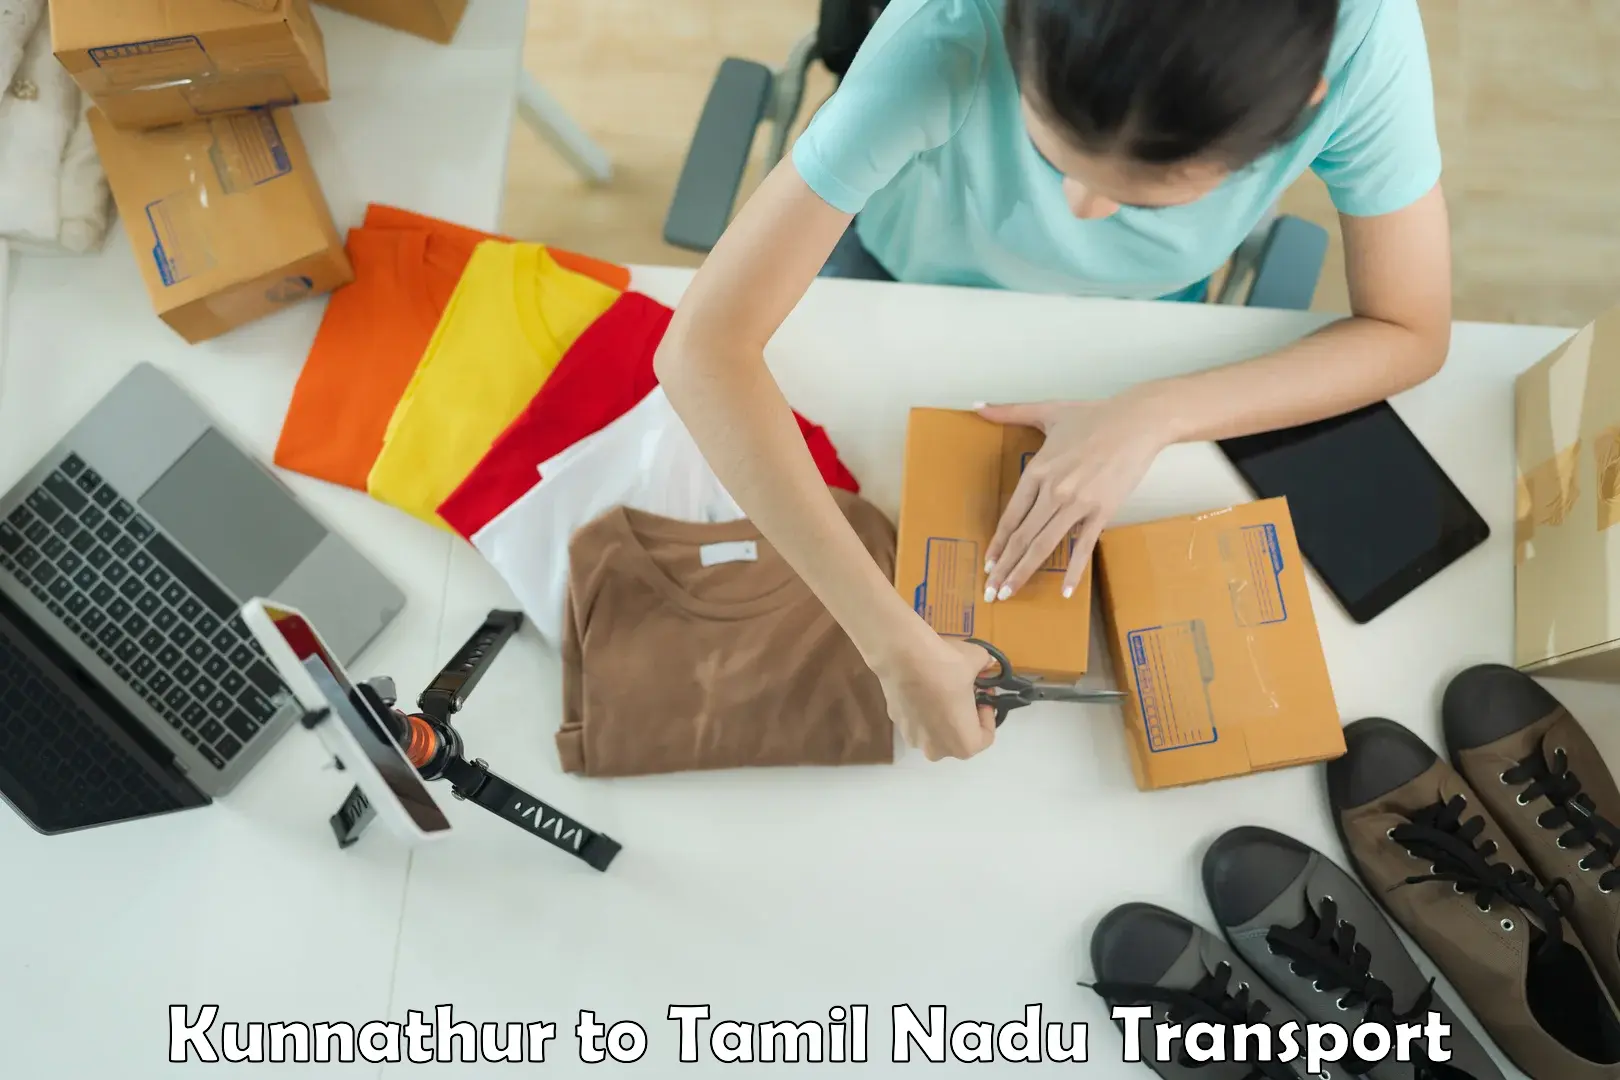 Inland transportation services Kunnathur to Shanmugha Arts Science Technology and Research Academy Thanjavur